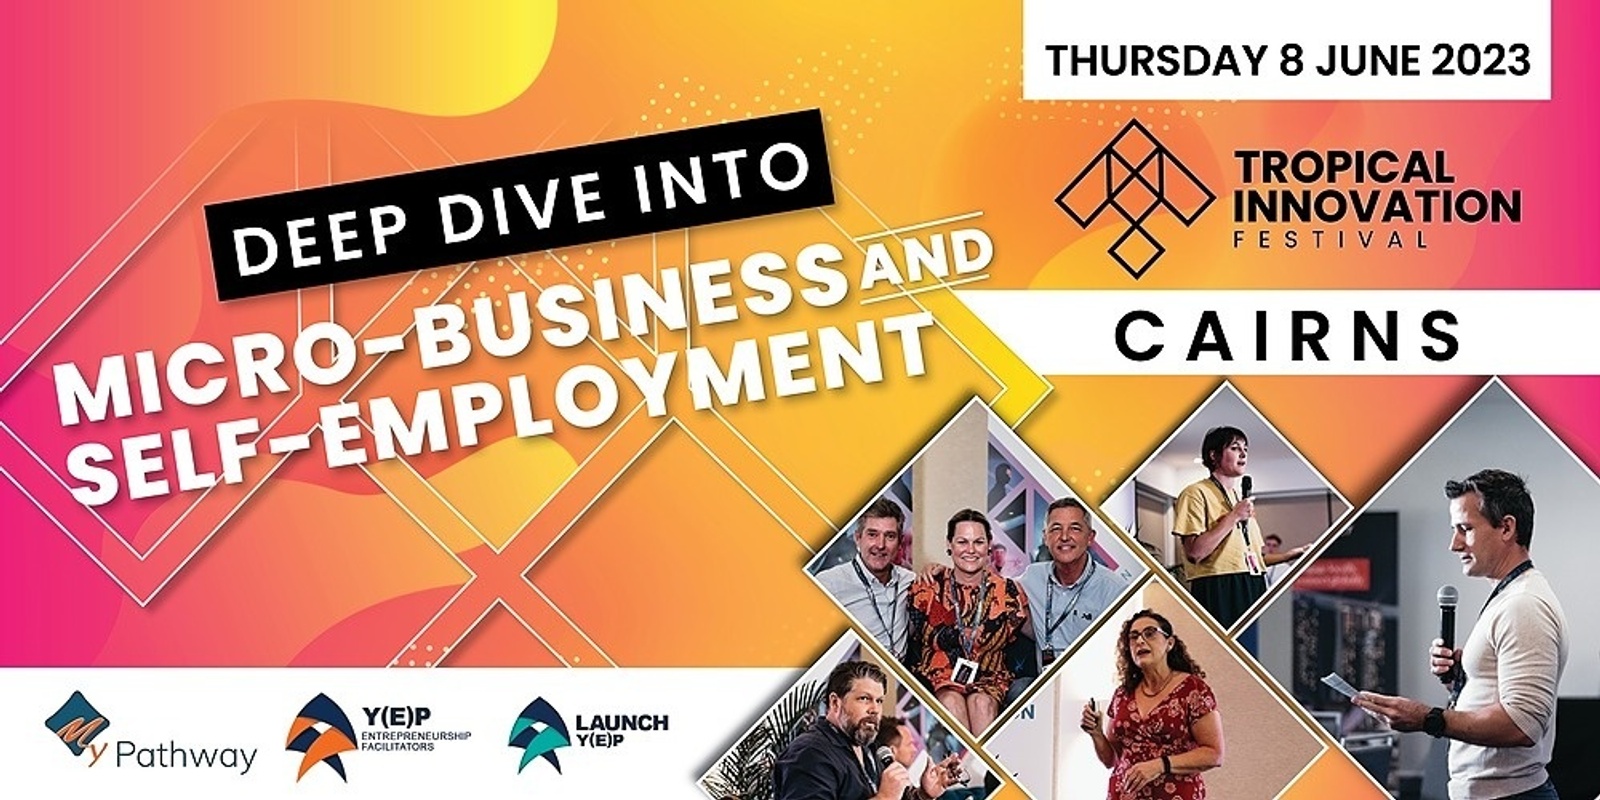 Deep Dive into Micro-business & Self-Employment | Cairns